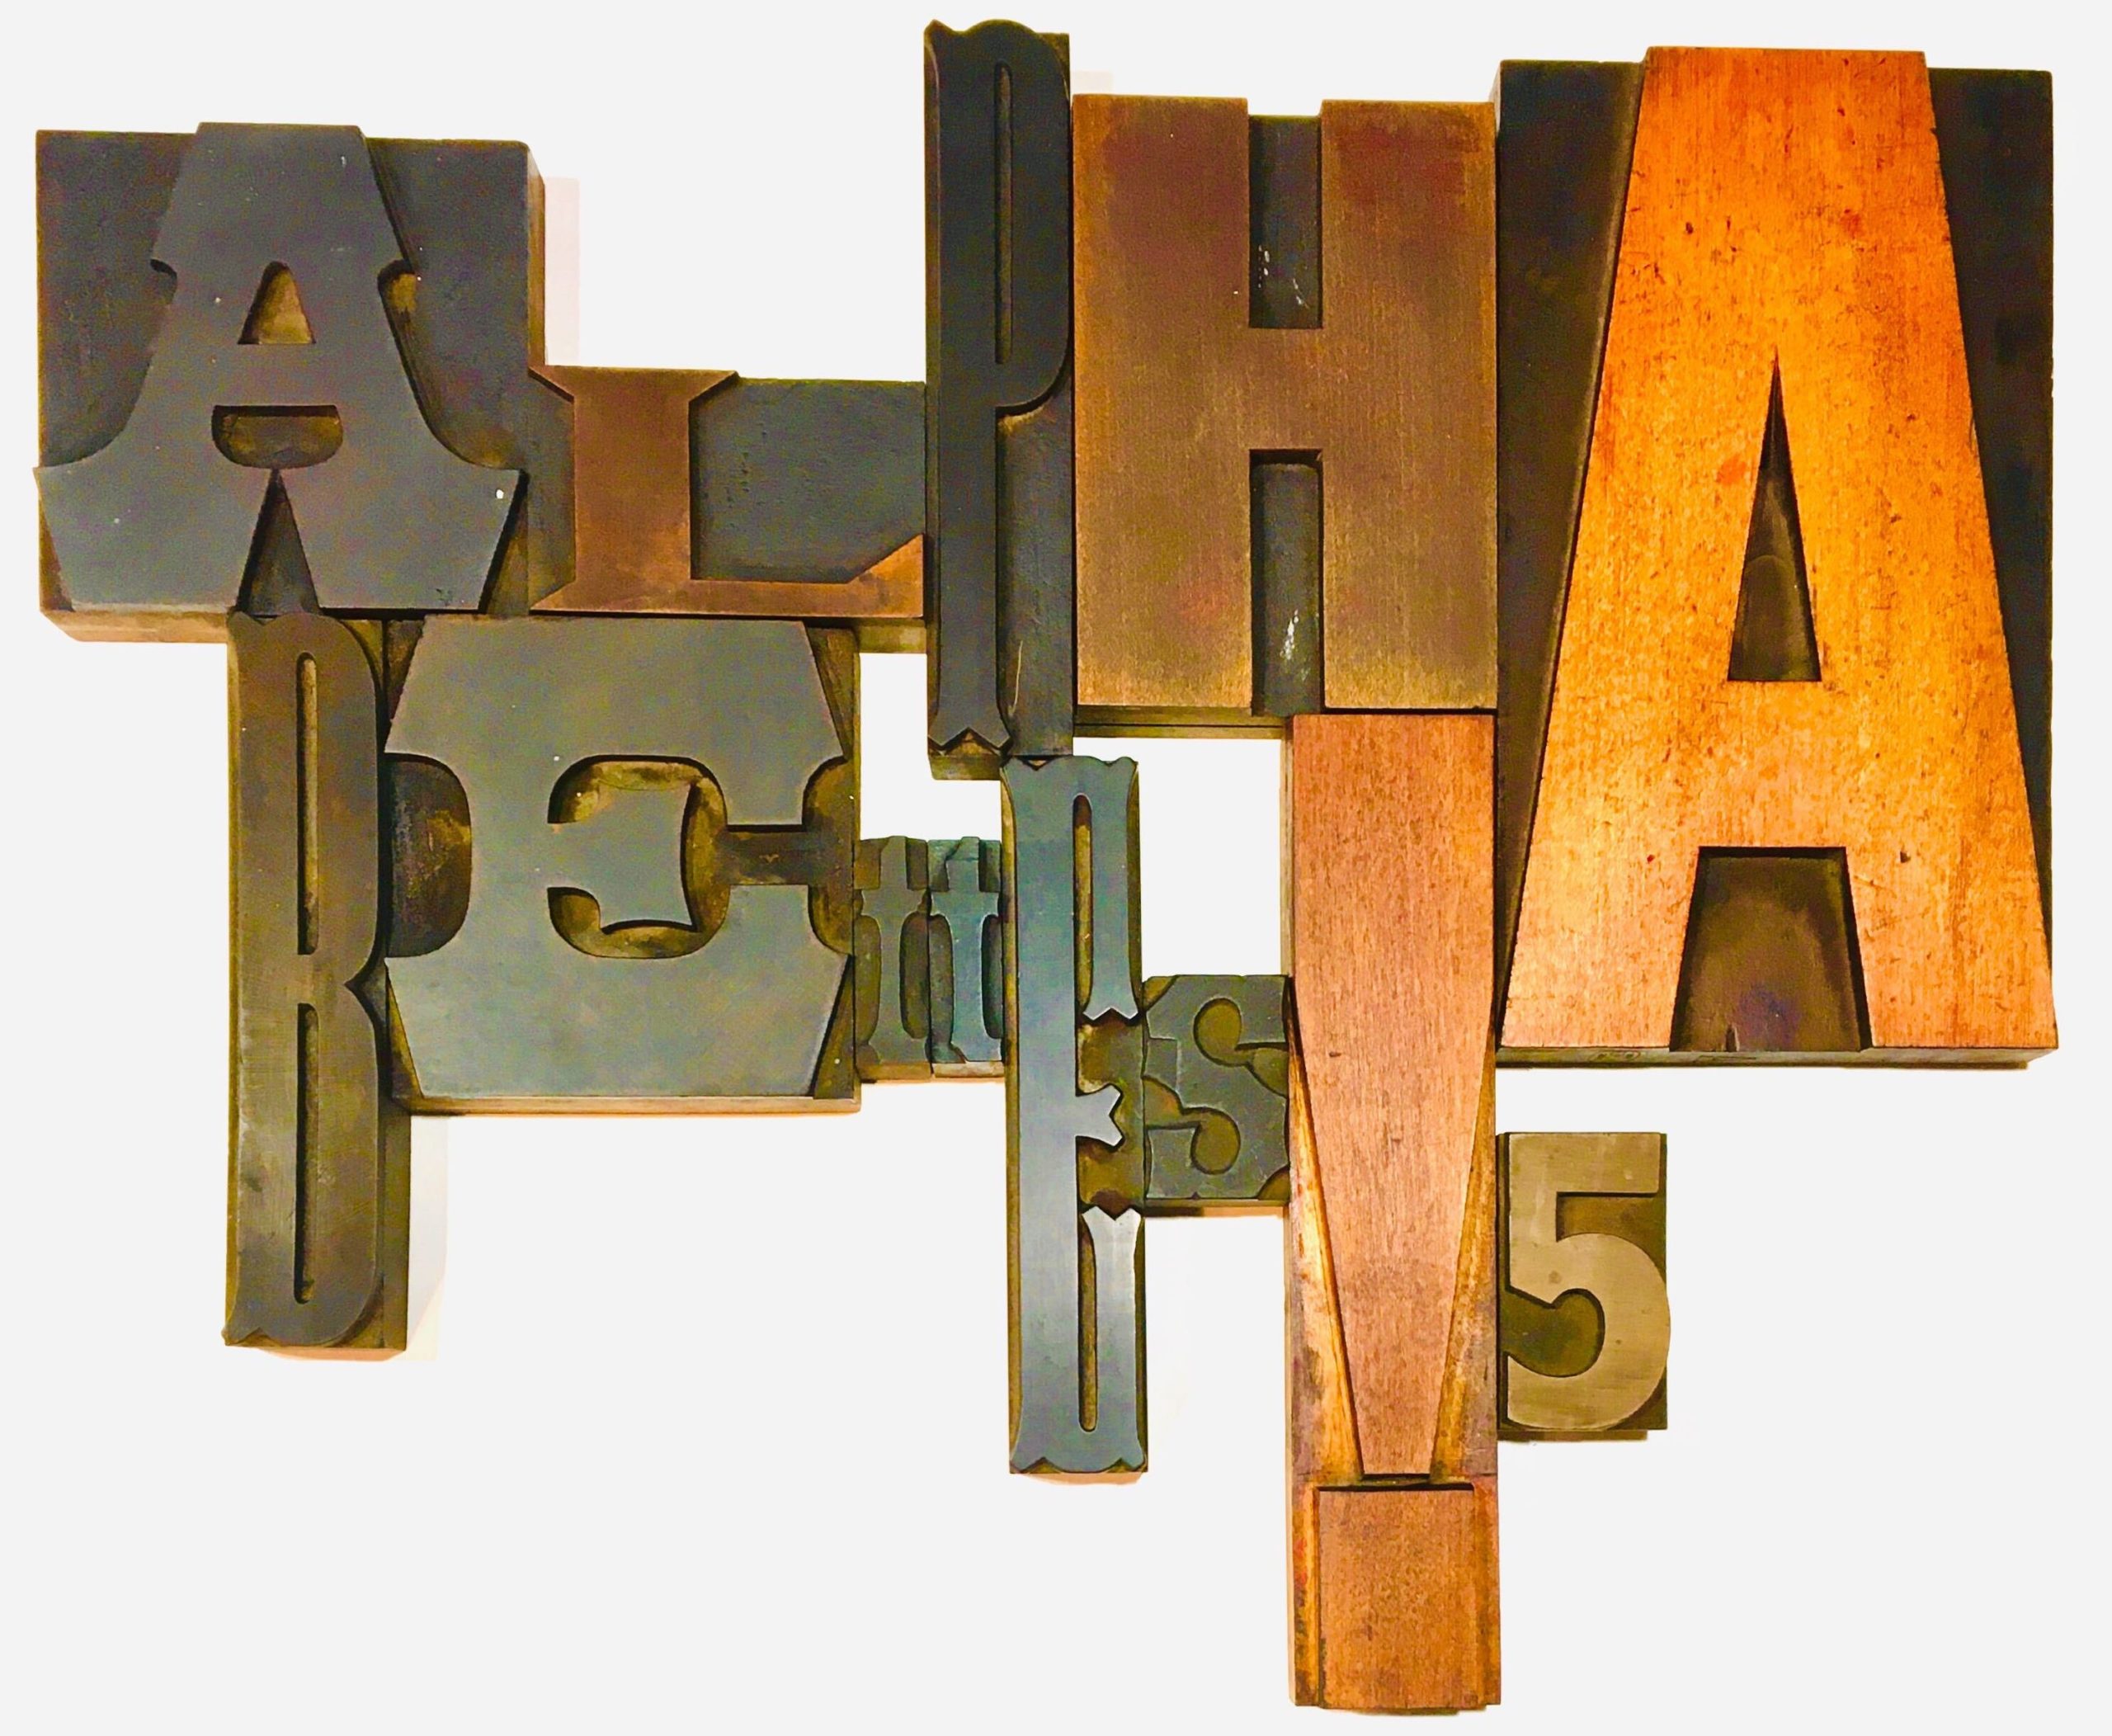 "Alphabettes" made out of Wood type